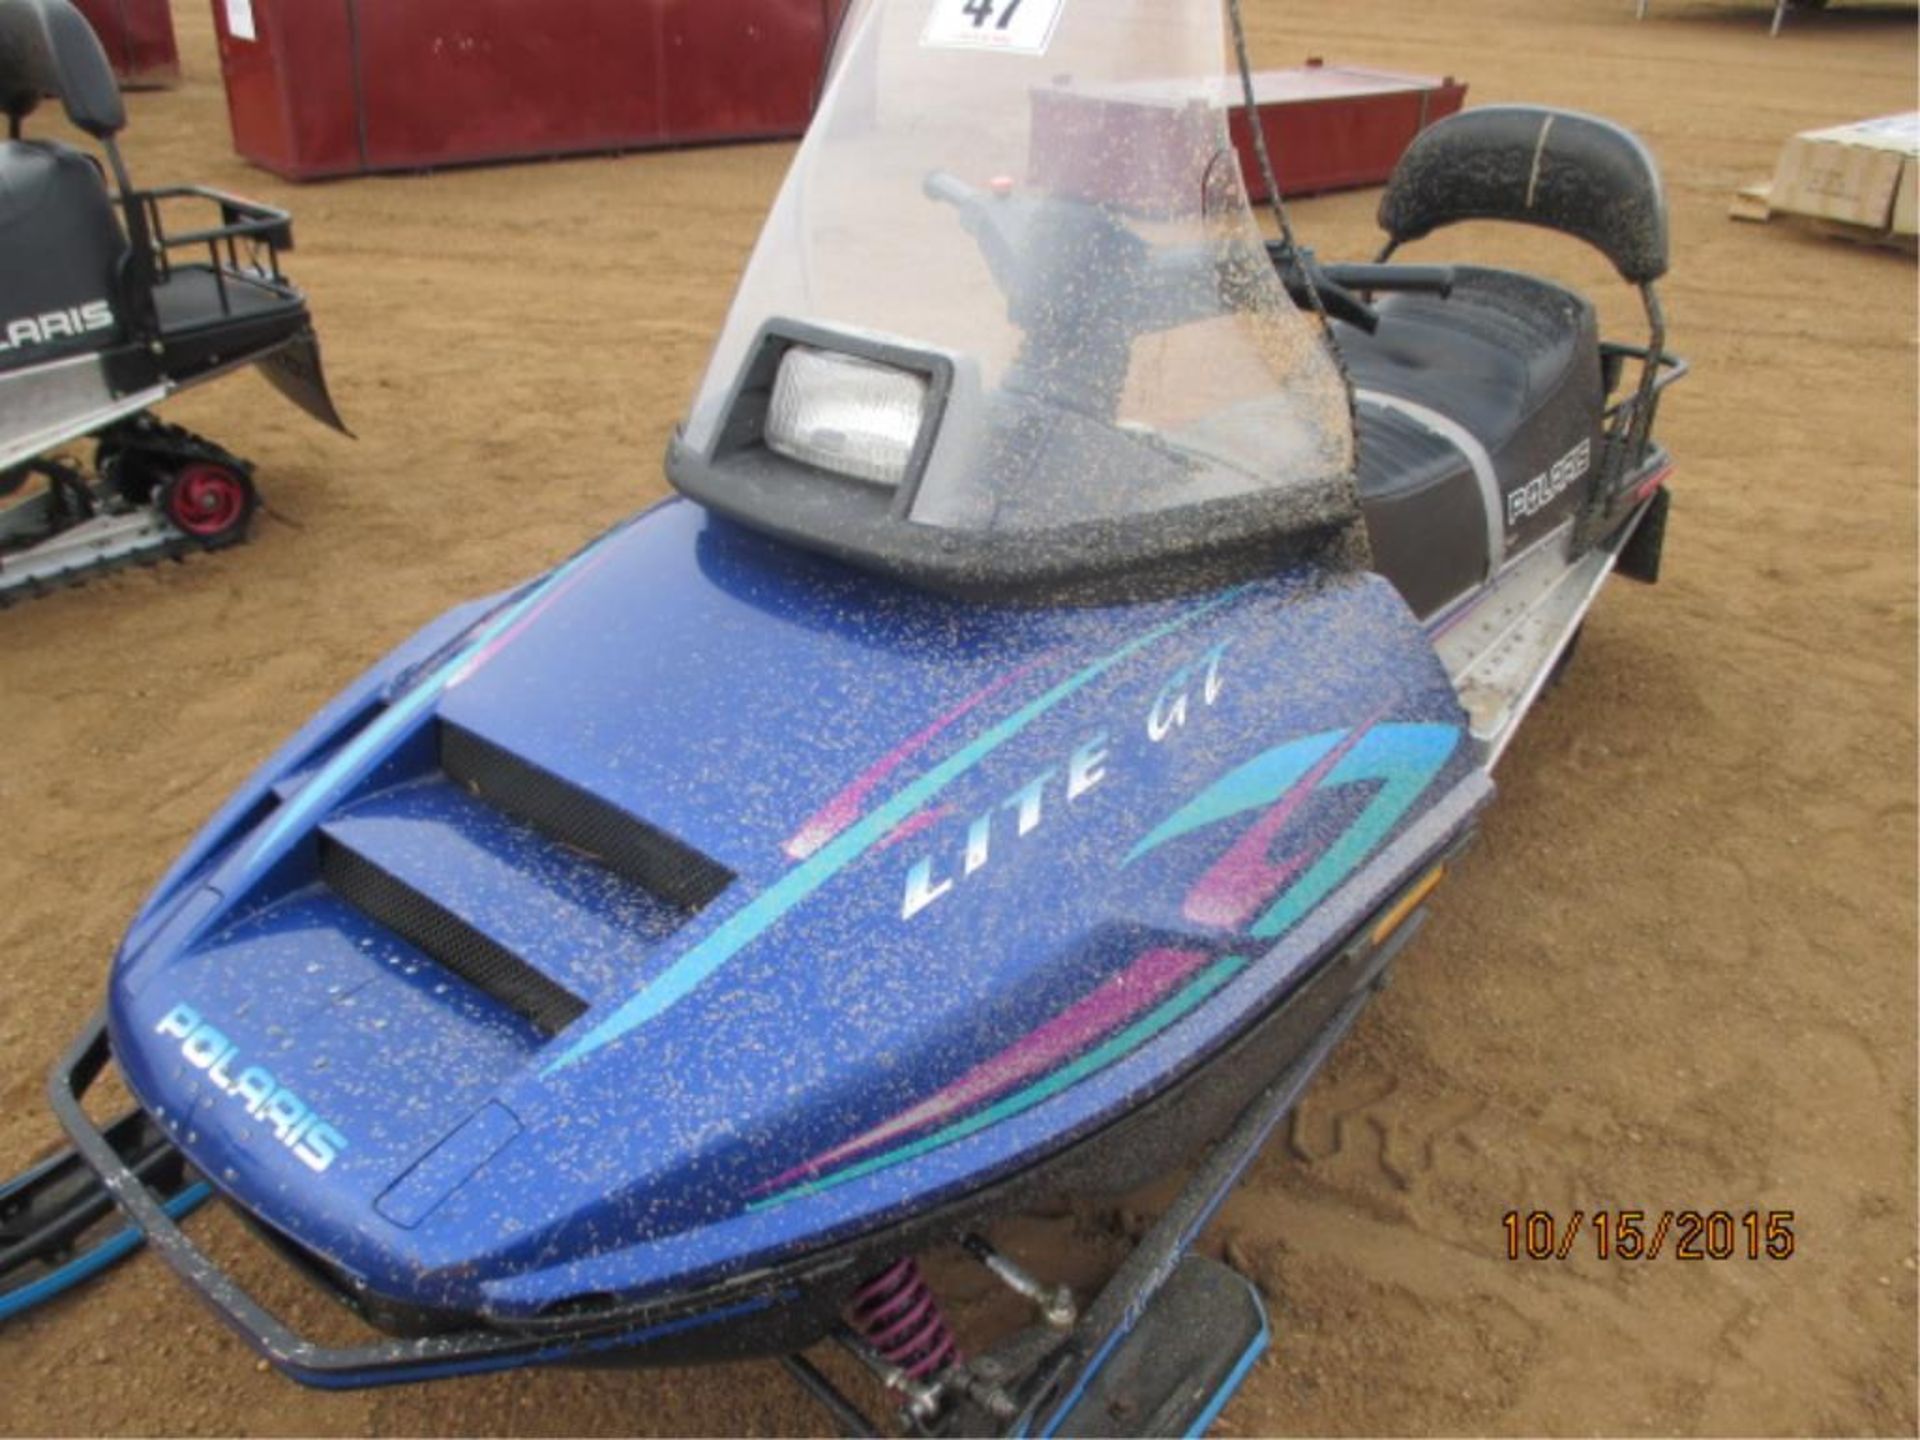 1997 Polaris Lite GT Snowmobile 3500 miles, (Snowmobile Cover, & Manuel  Available in Office)